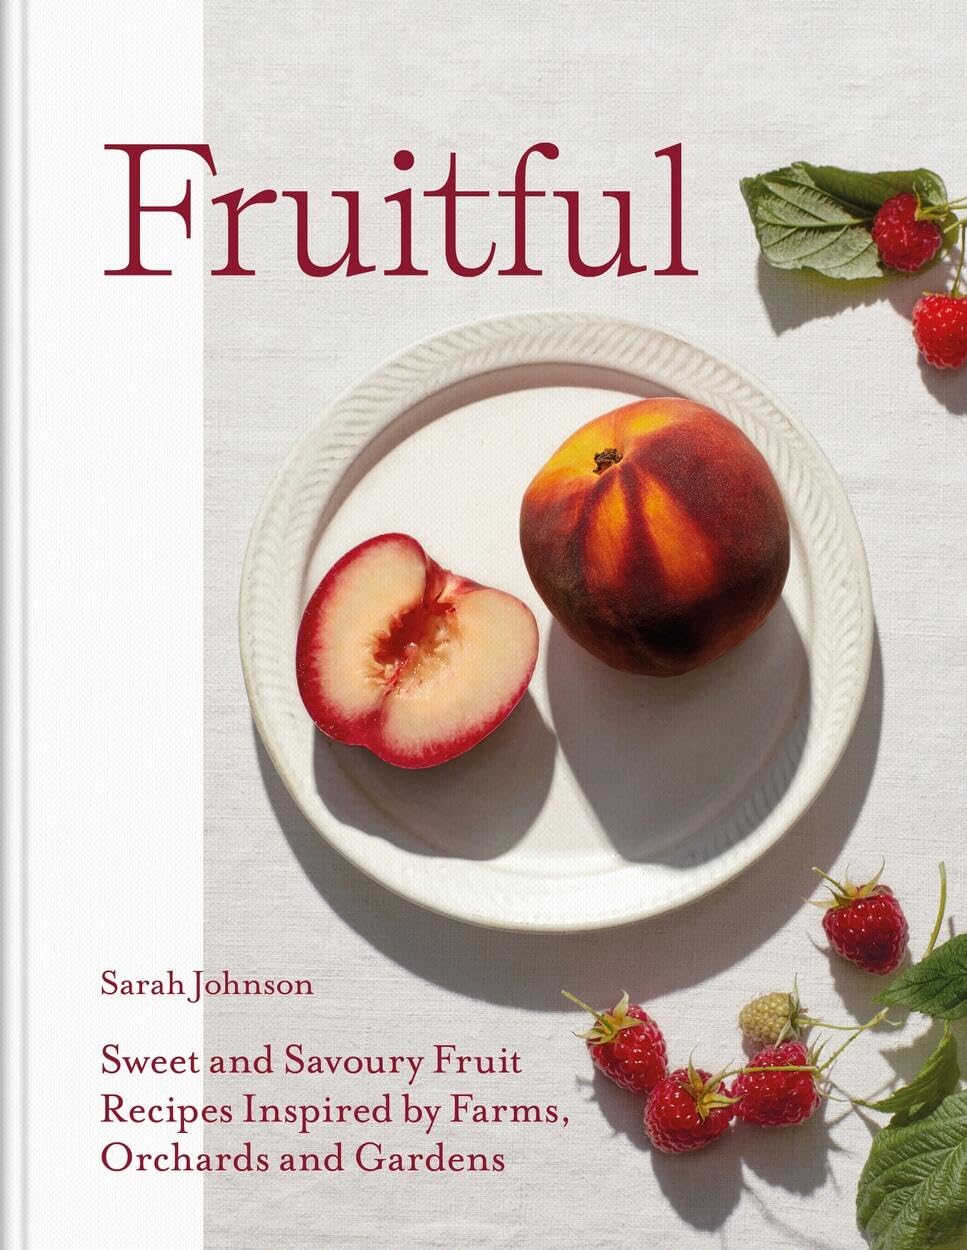 *Pre-order* Fruitful: Sweet and Savoury Fruit Recipes Inspired by Farms, Orchards and Gardens (Sarah Johnson)